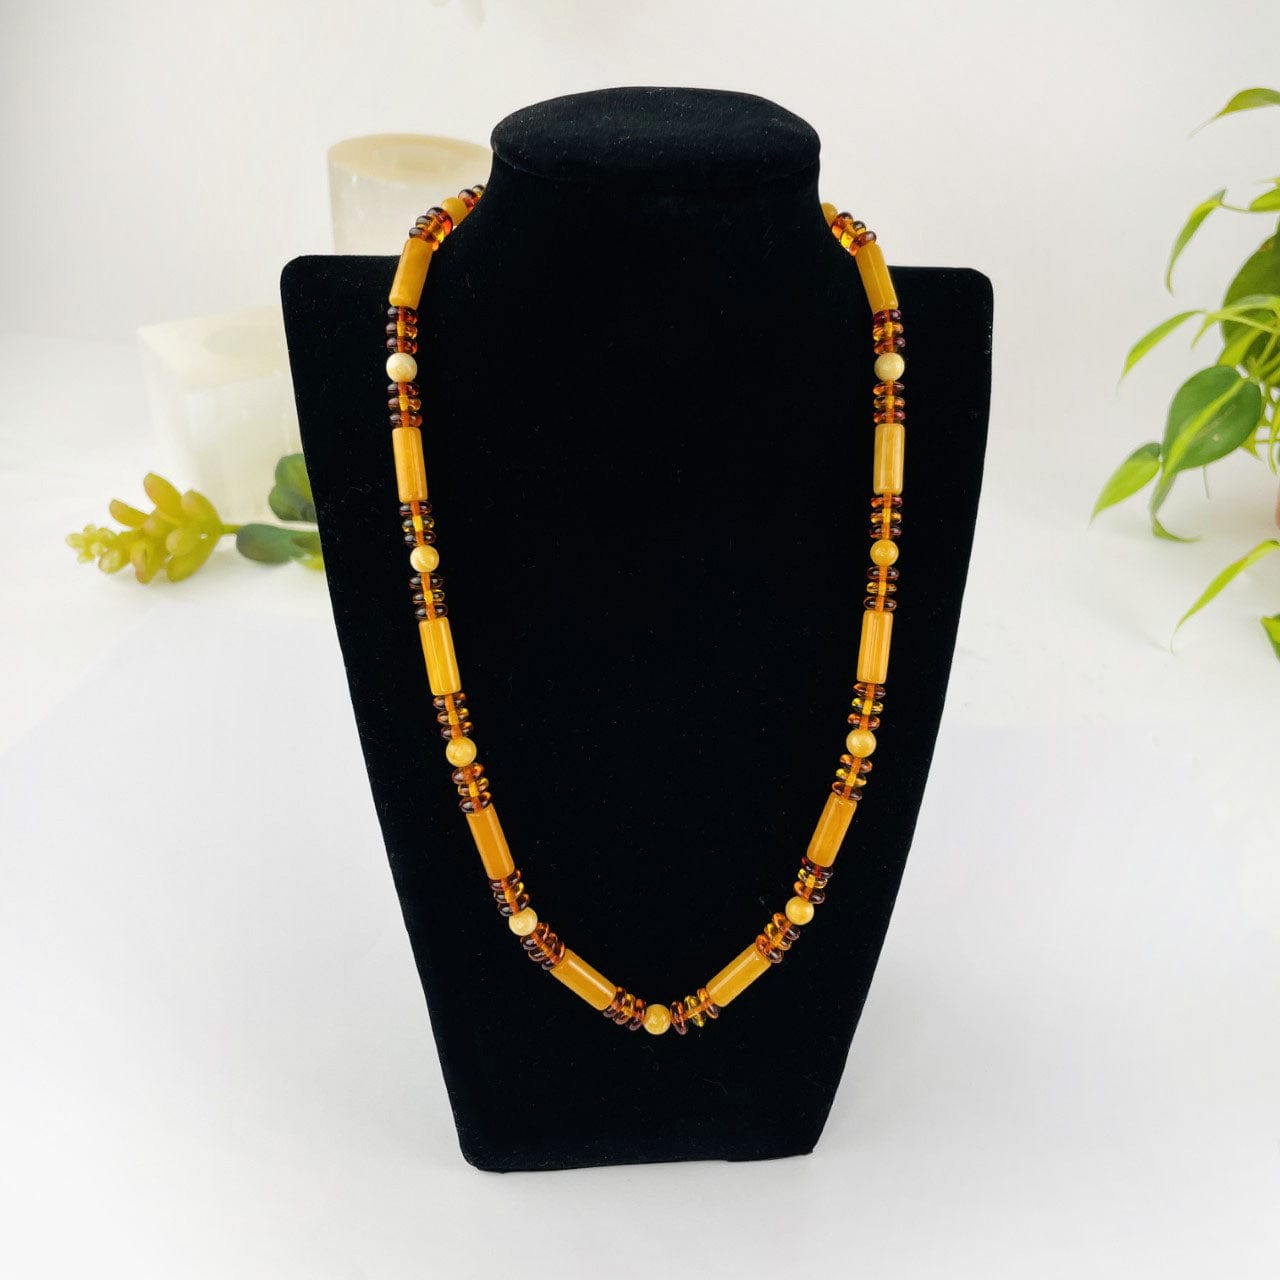 Amber Beaded Necklace with Assorted Beads on a display bust